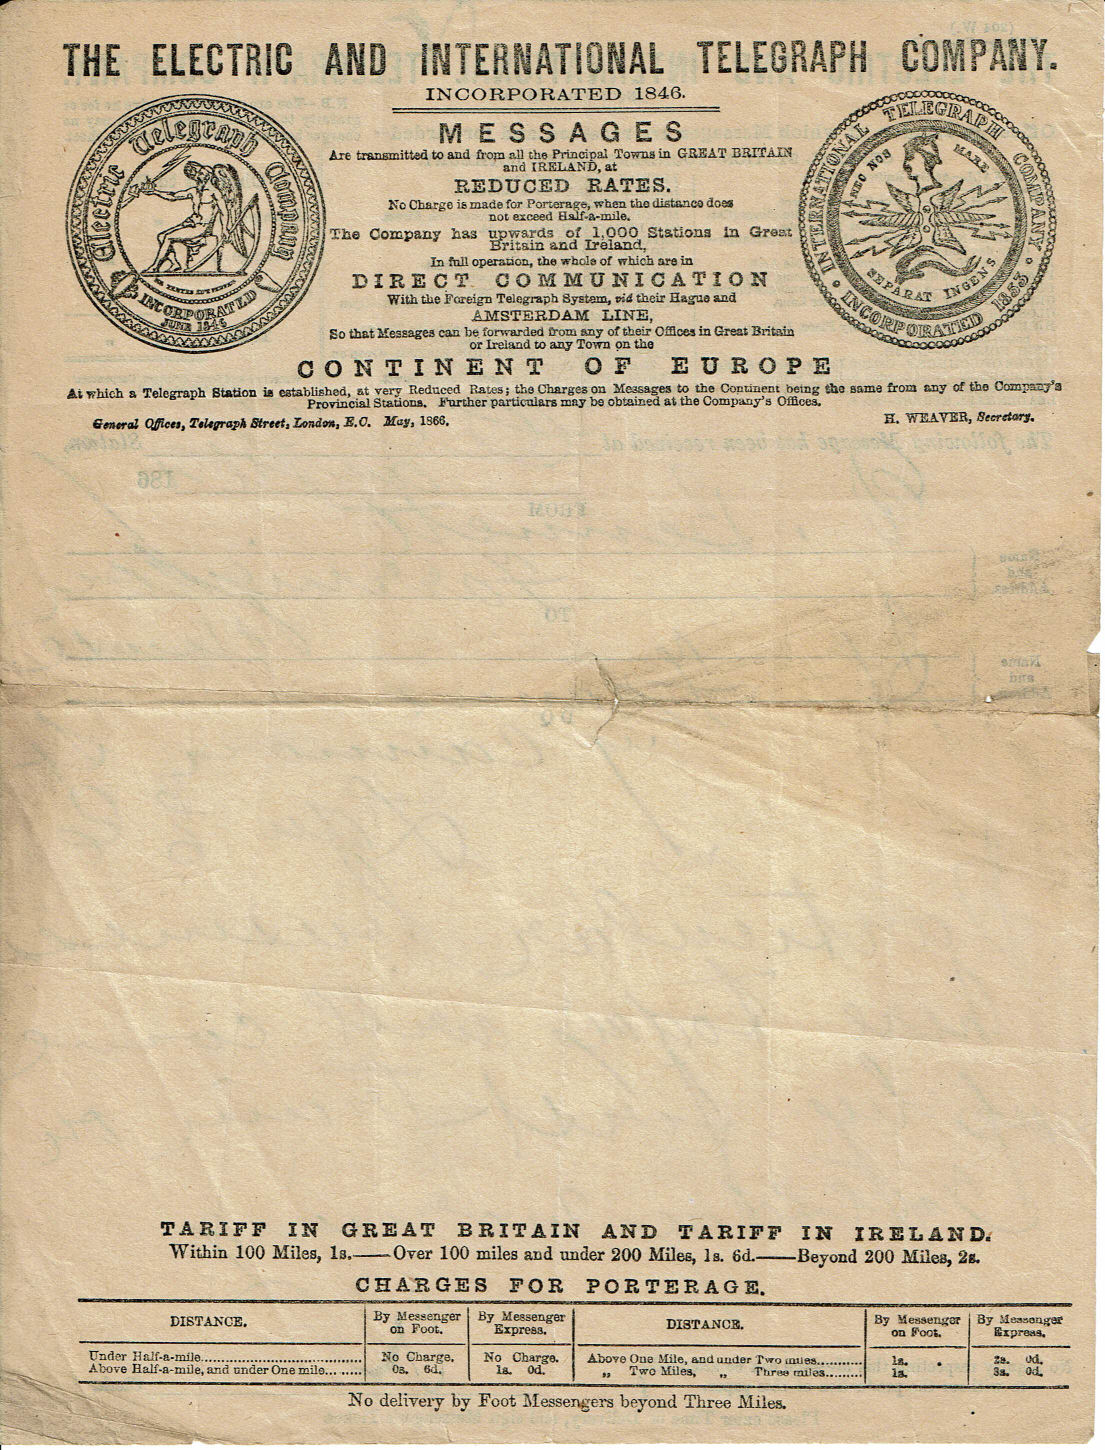 Electric Telegraph Company Stationery - back.